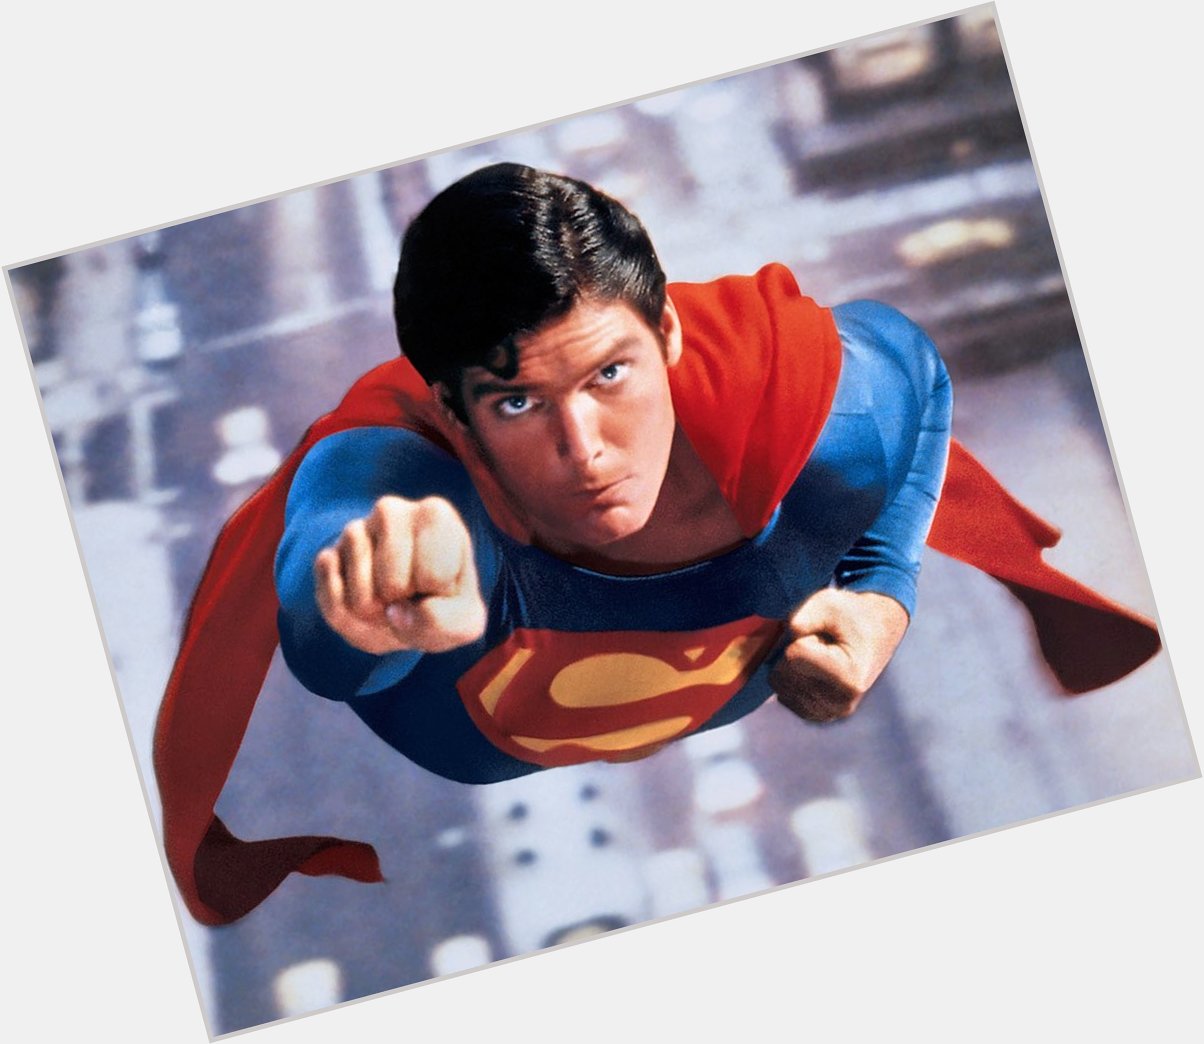 Happy birthday to the one and only Superman Christopher Reeve!  